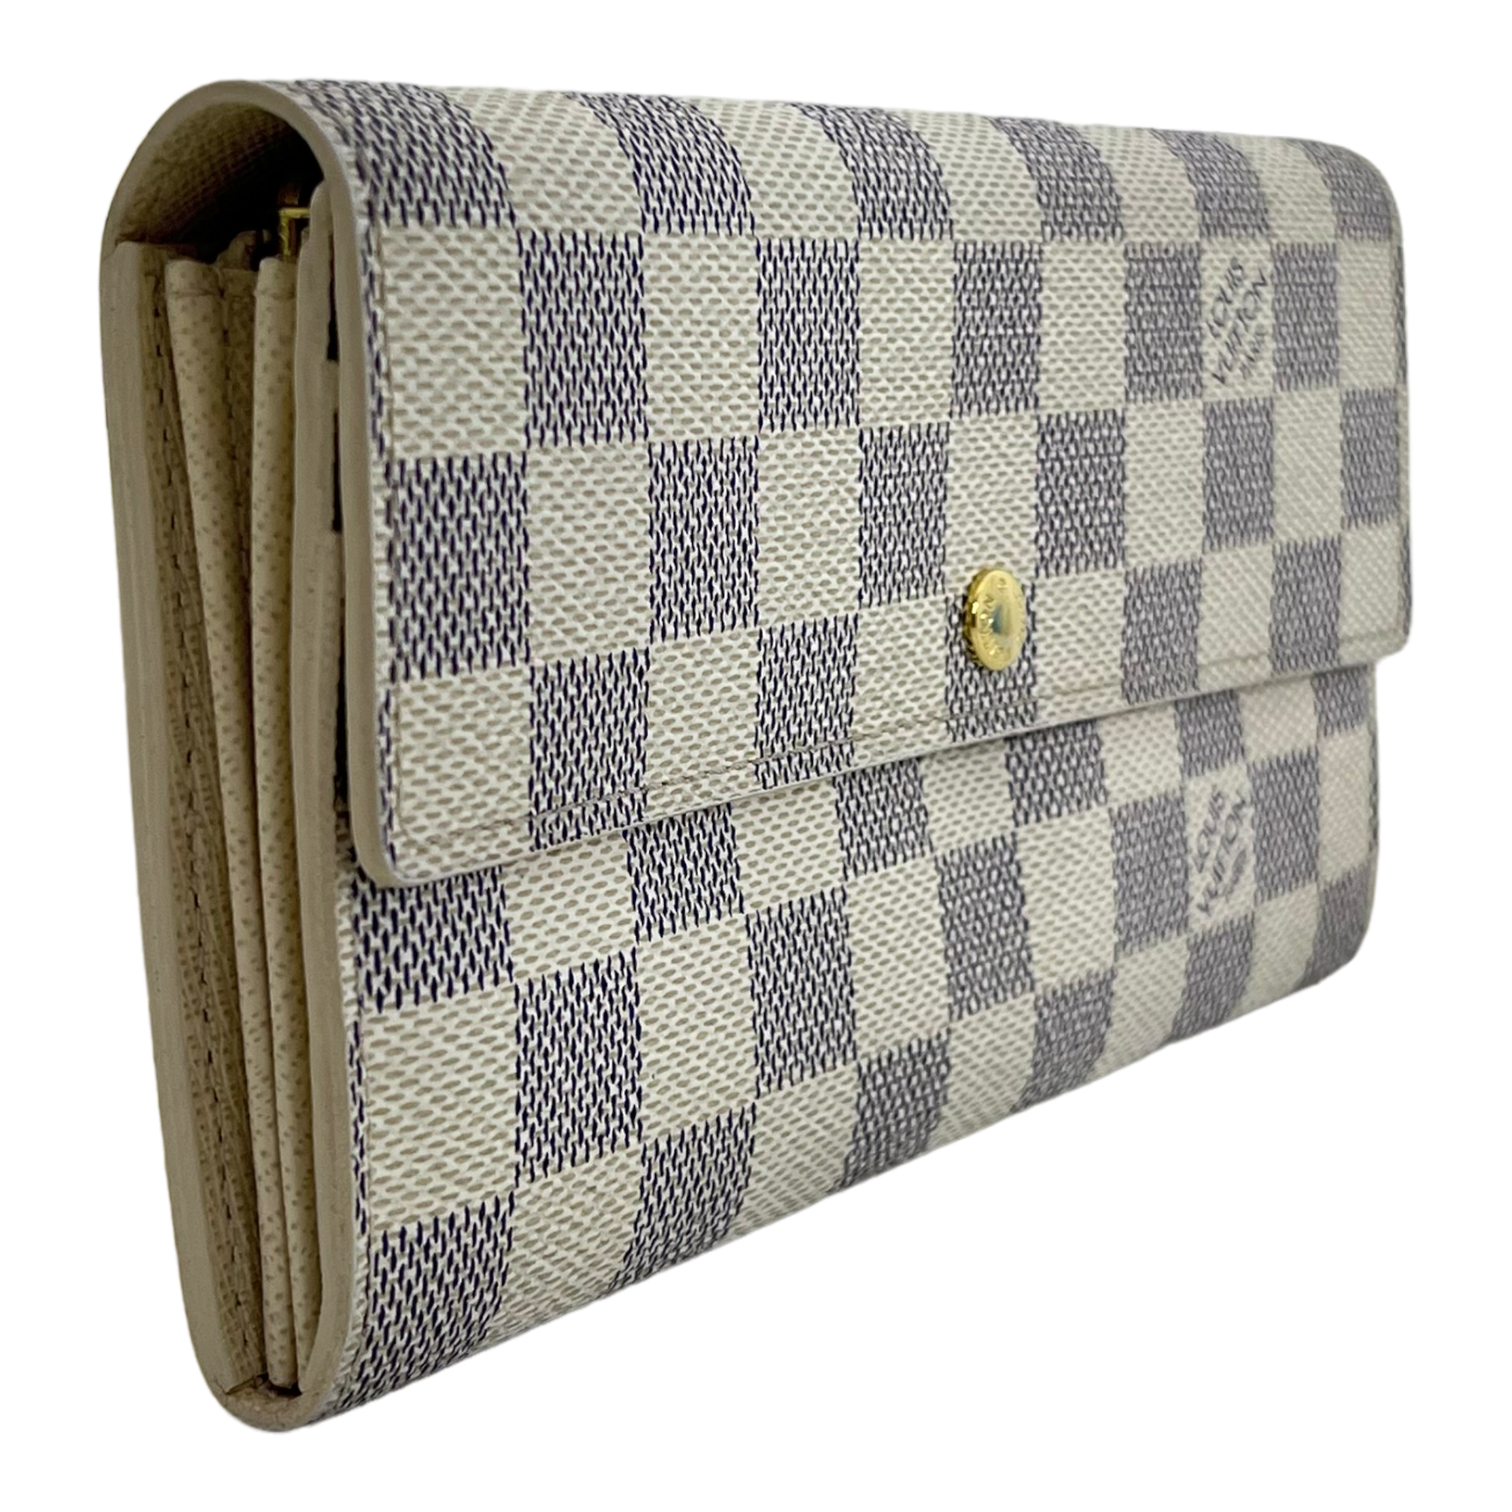 Damier Azur Long Wallet with Chain